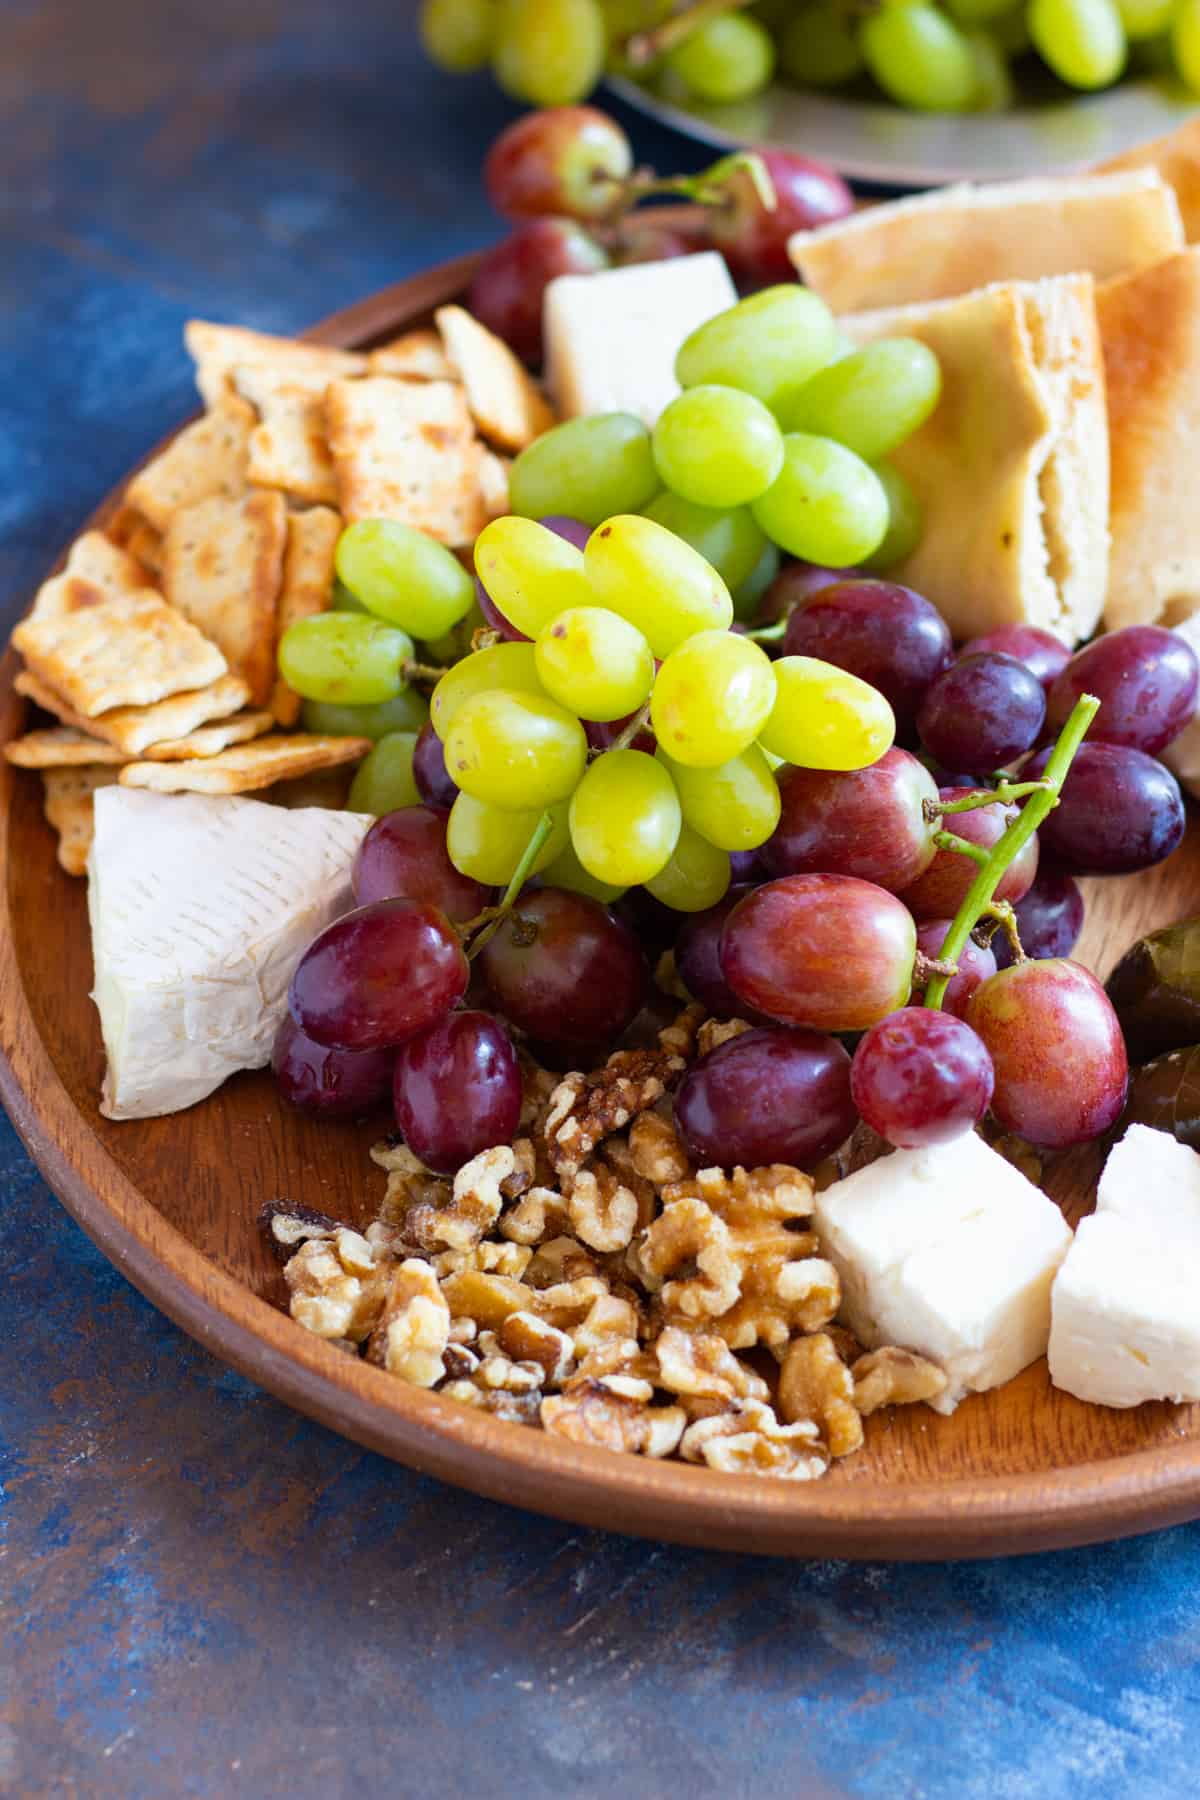 Grapes add a nice color and flavor to this appetizer board. 